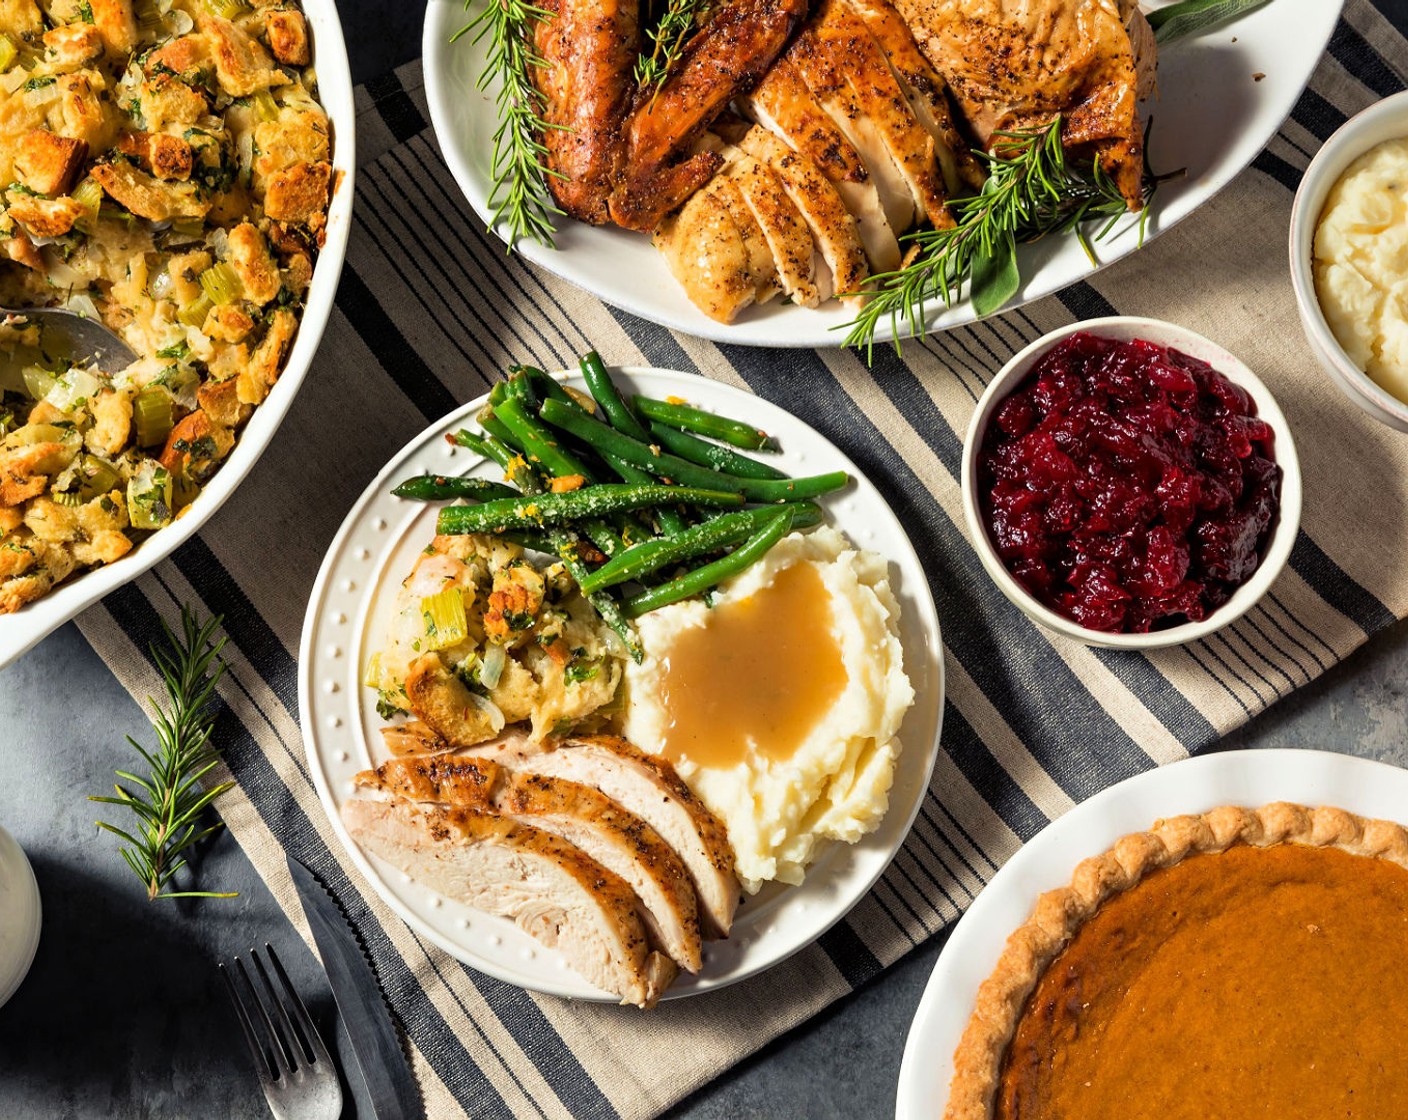 Top 10 Thanksgiving Foods That Will Be On Every Table This Year - SideChef